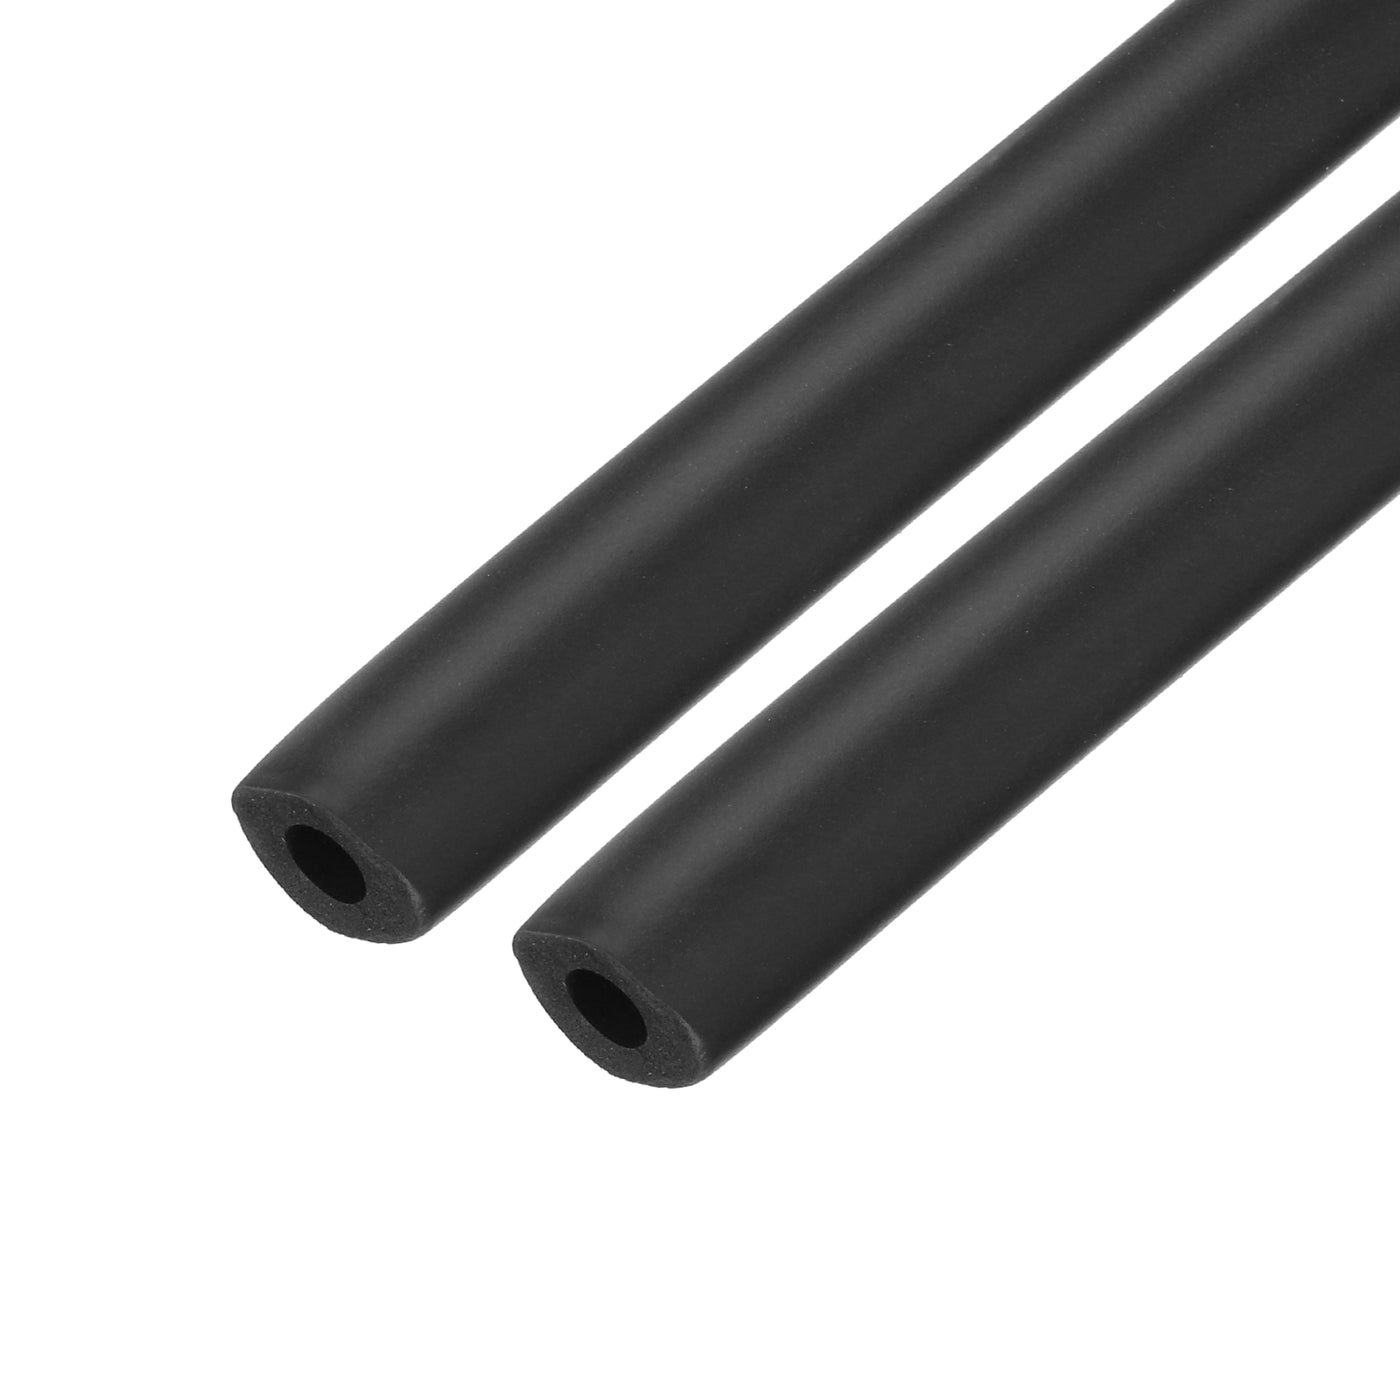 uxcell Uxcell 2pcs 3.3ft Pipe Insulation Tube 5/16 Inch(8mm) ID 18mm OD Foam Tubing for Handle Grip Support, Black